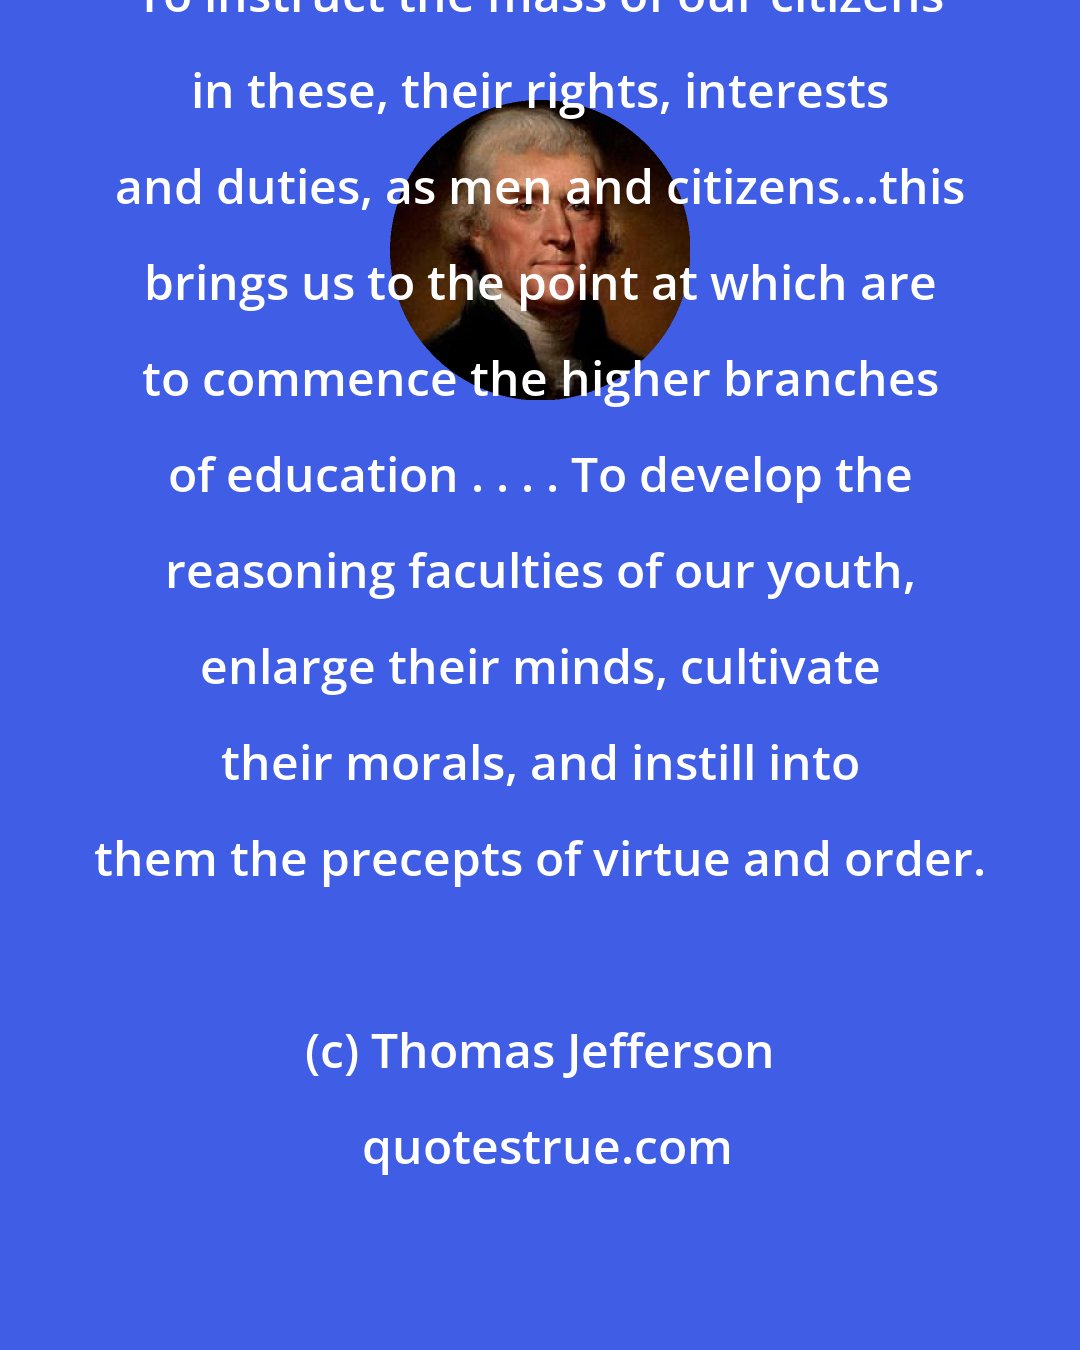 Thomas Jefferson: To instruct the mass of our citizens in these, their rights, interests and duties, as men and citizens...this brings us to the point at which are to commence the higher branches of education . . . . To develop the reasoning faculties of our youth, enlarge their minds, cultivate their morals, and instill into them the precepts of virtue and order.